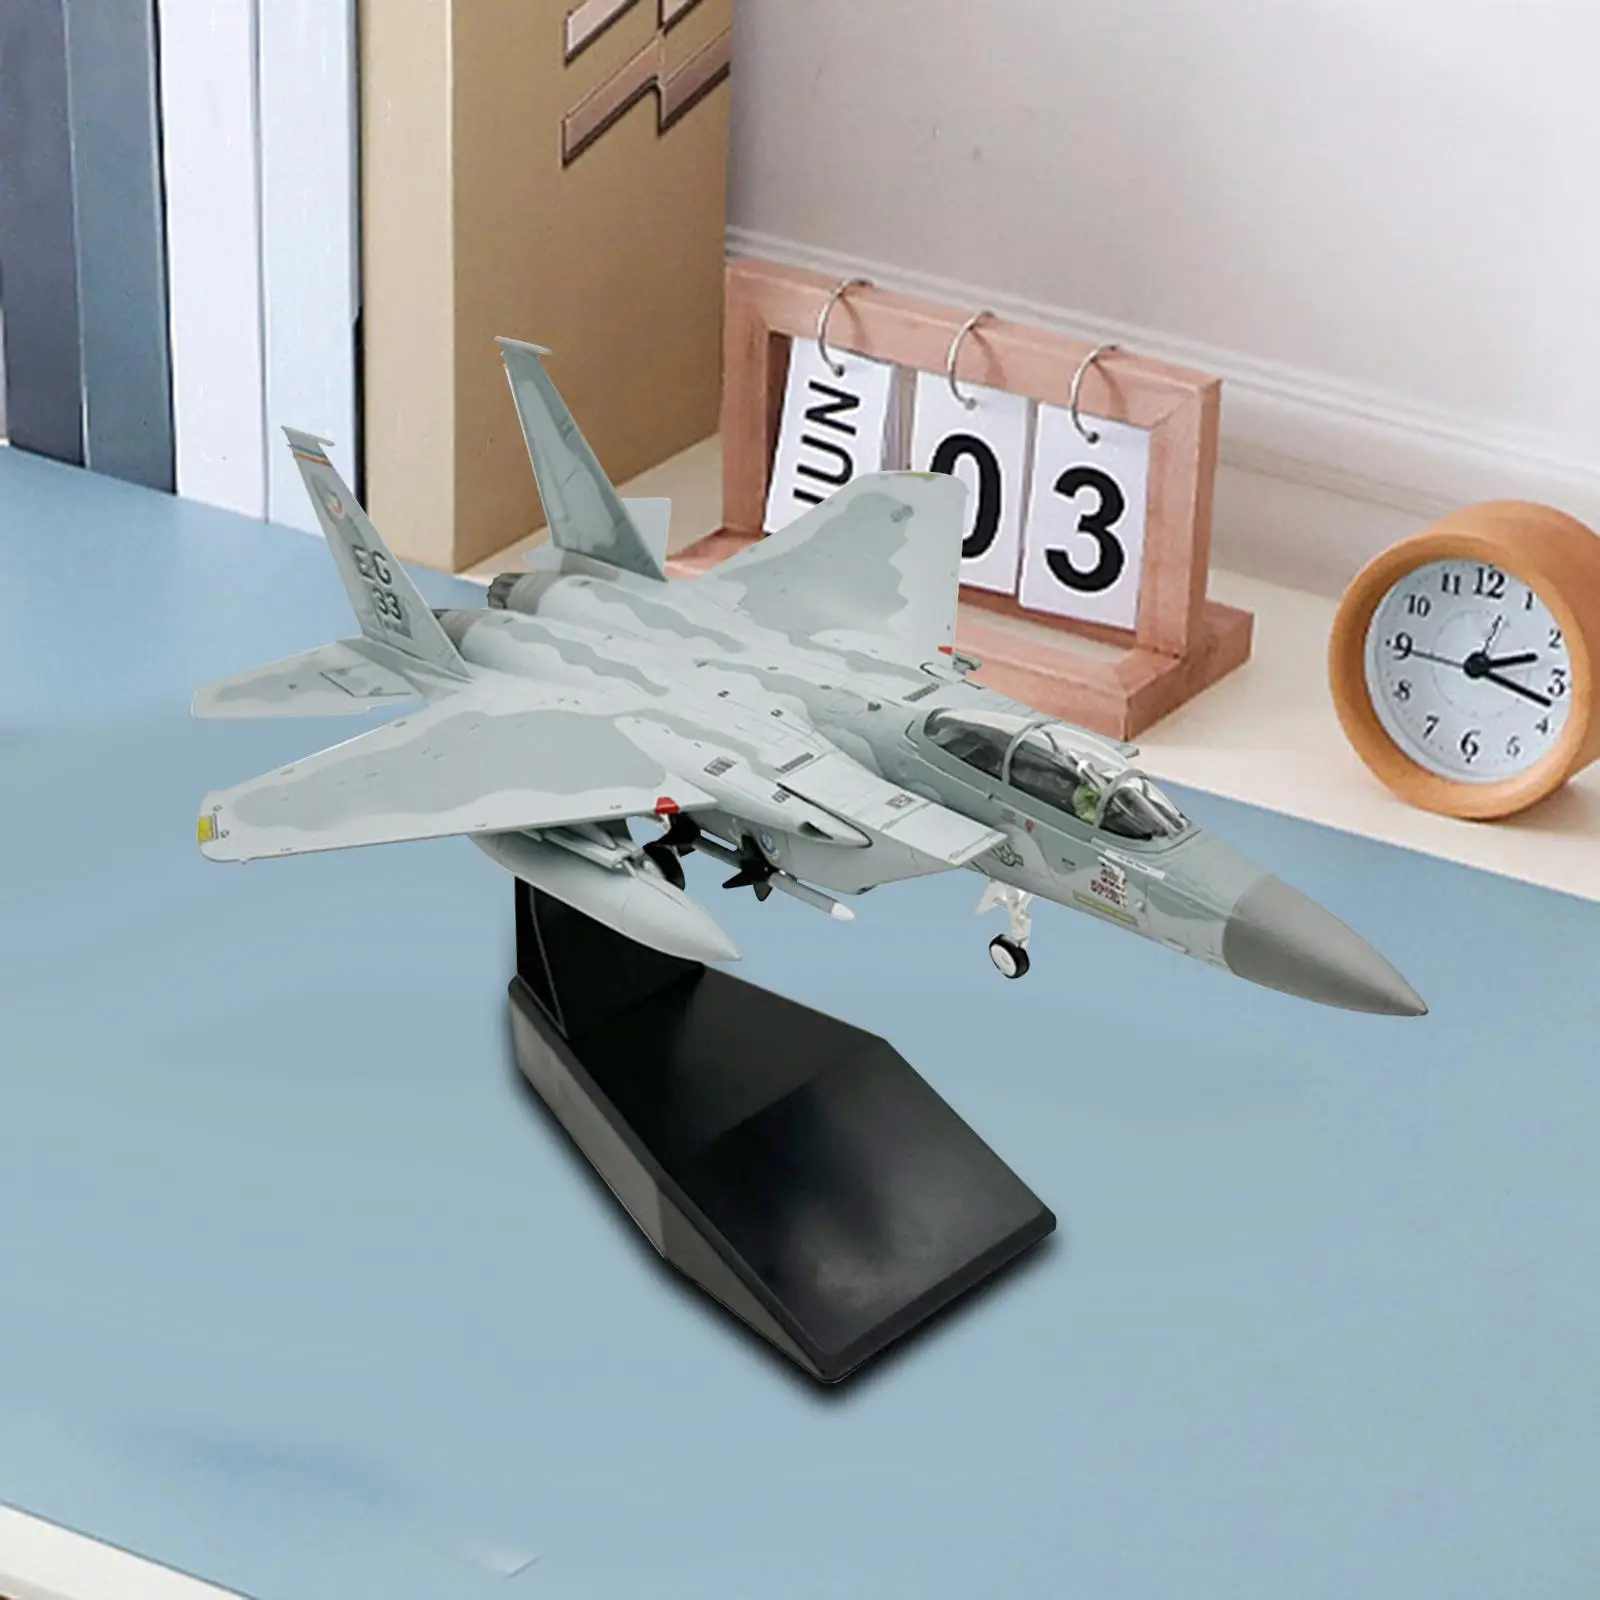 Aircraft Model Metal Early Educational Toy:100 Scale F15 Aviation Model for Collectables Home Decor Ornament Gifts Teens Gift